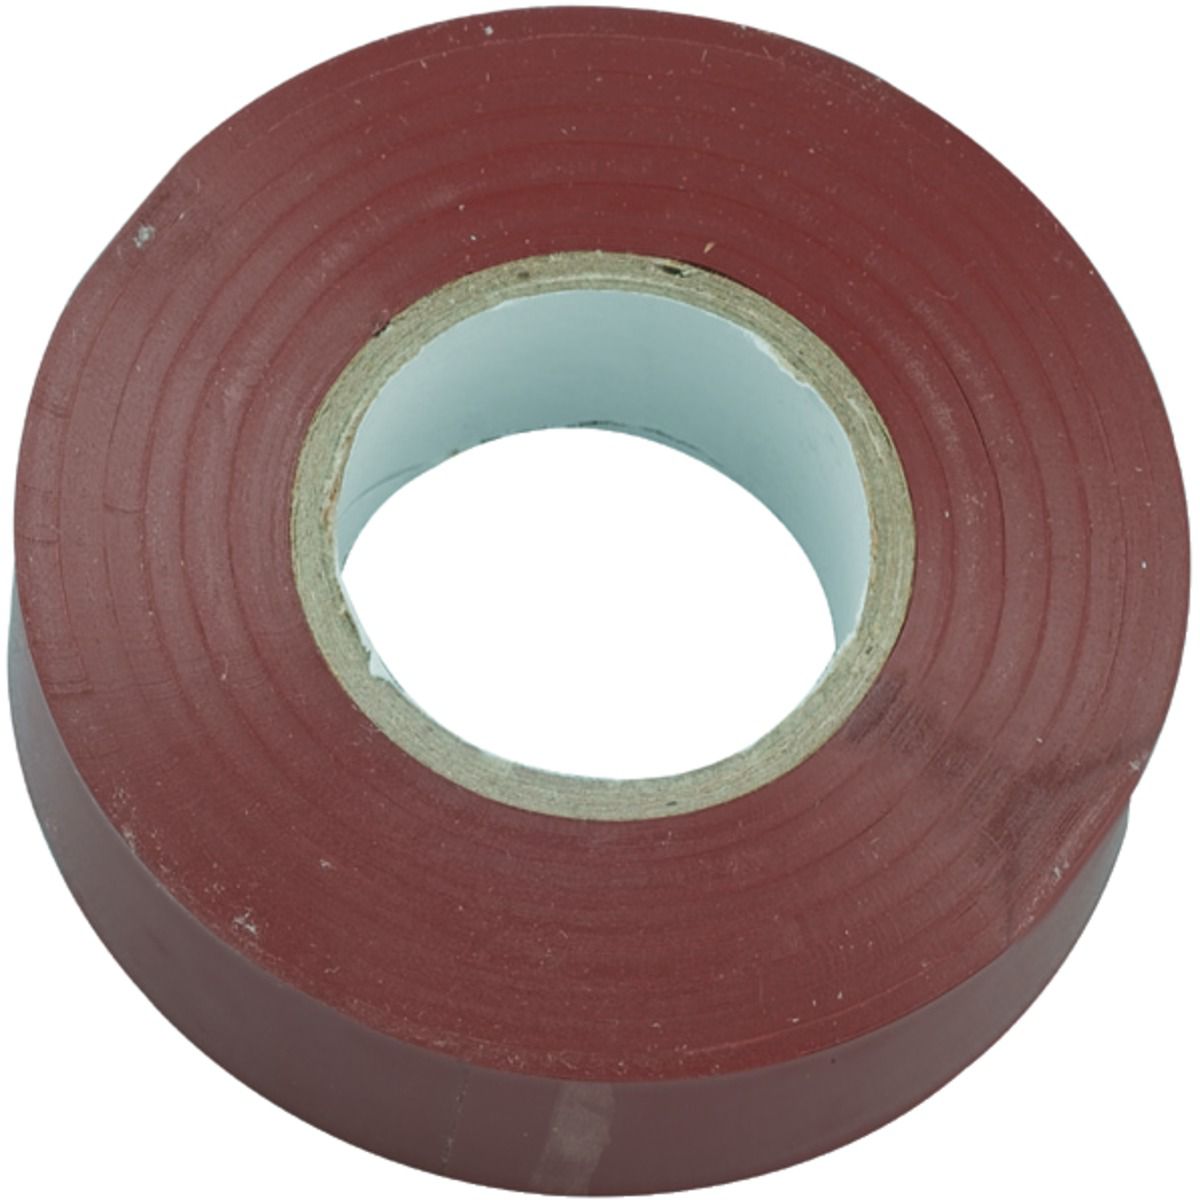 Image of Deta Brown PVC Electrical Insulation Tape - 20m x 19mm